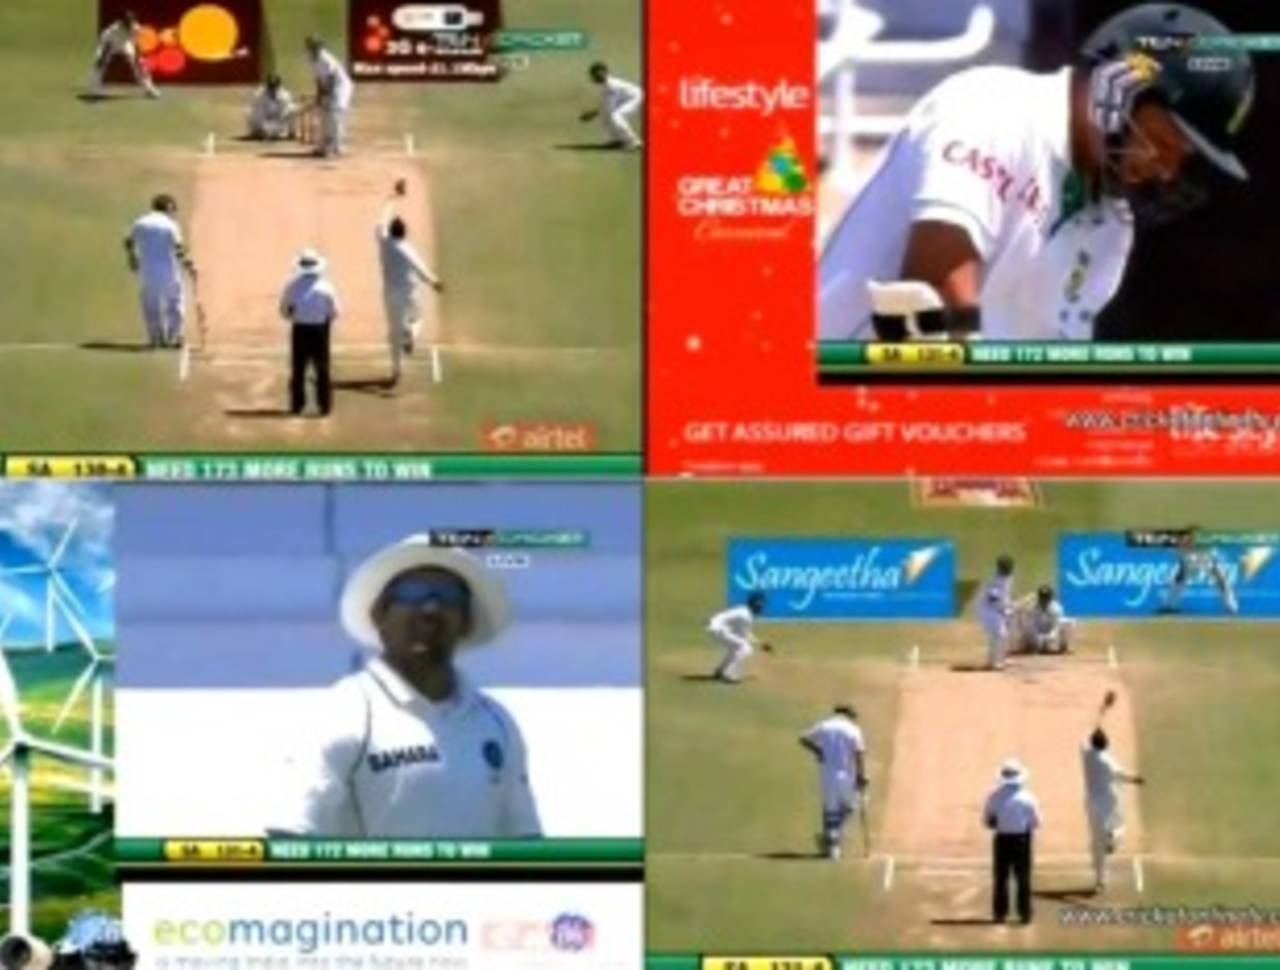 A collage of the images from the coverage of the India-South Africa series on Ten Cricket